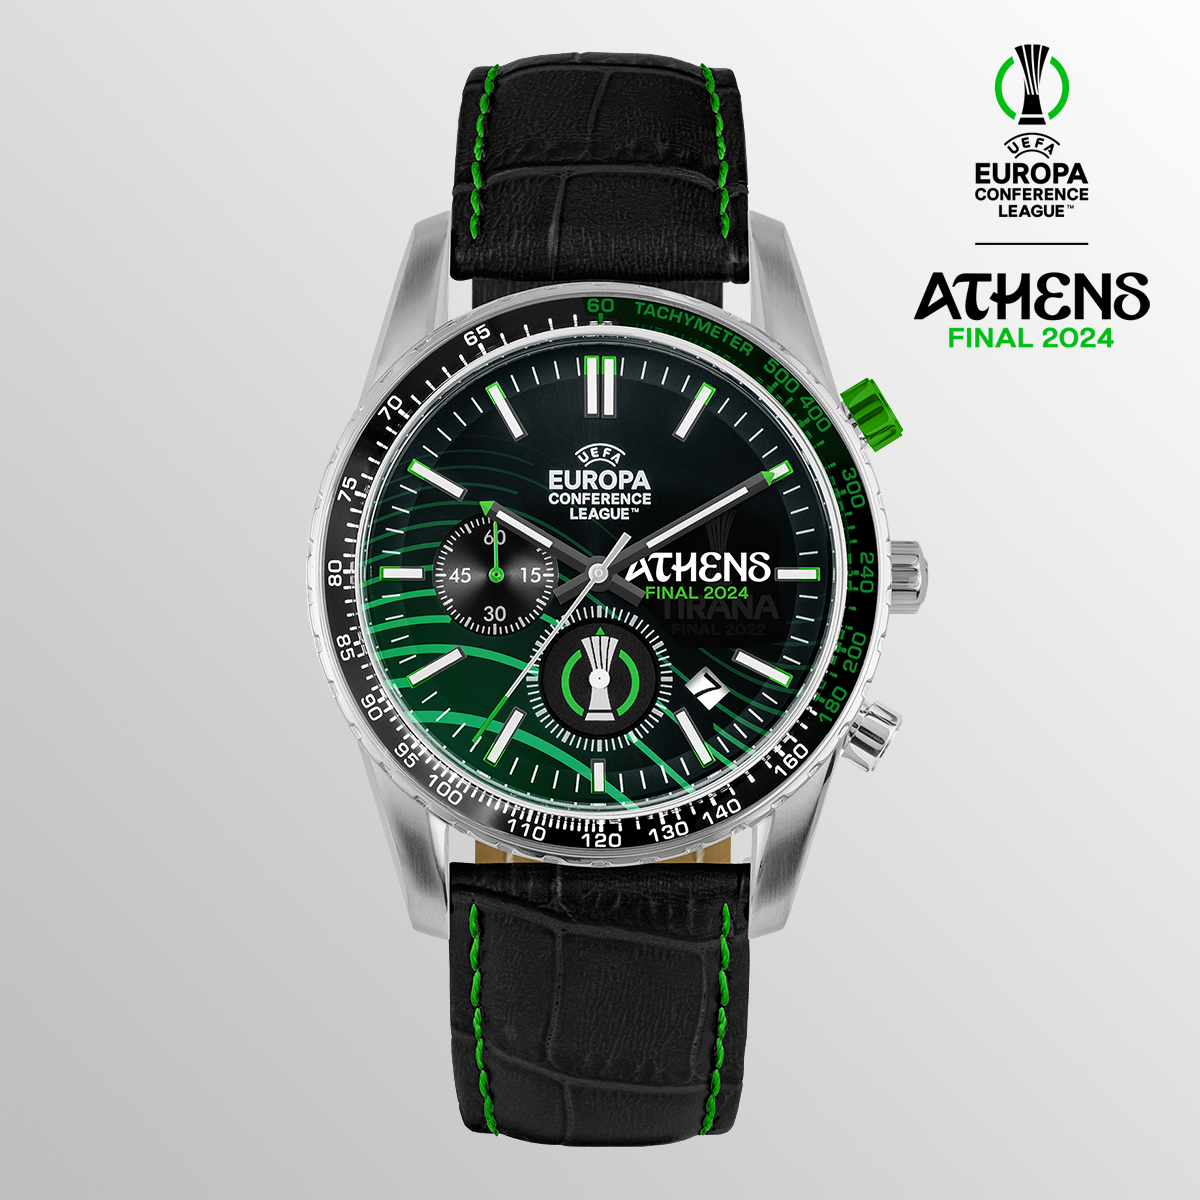 UECL Athens Final 2024 Chronograph ECL-101E Watch